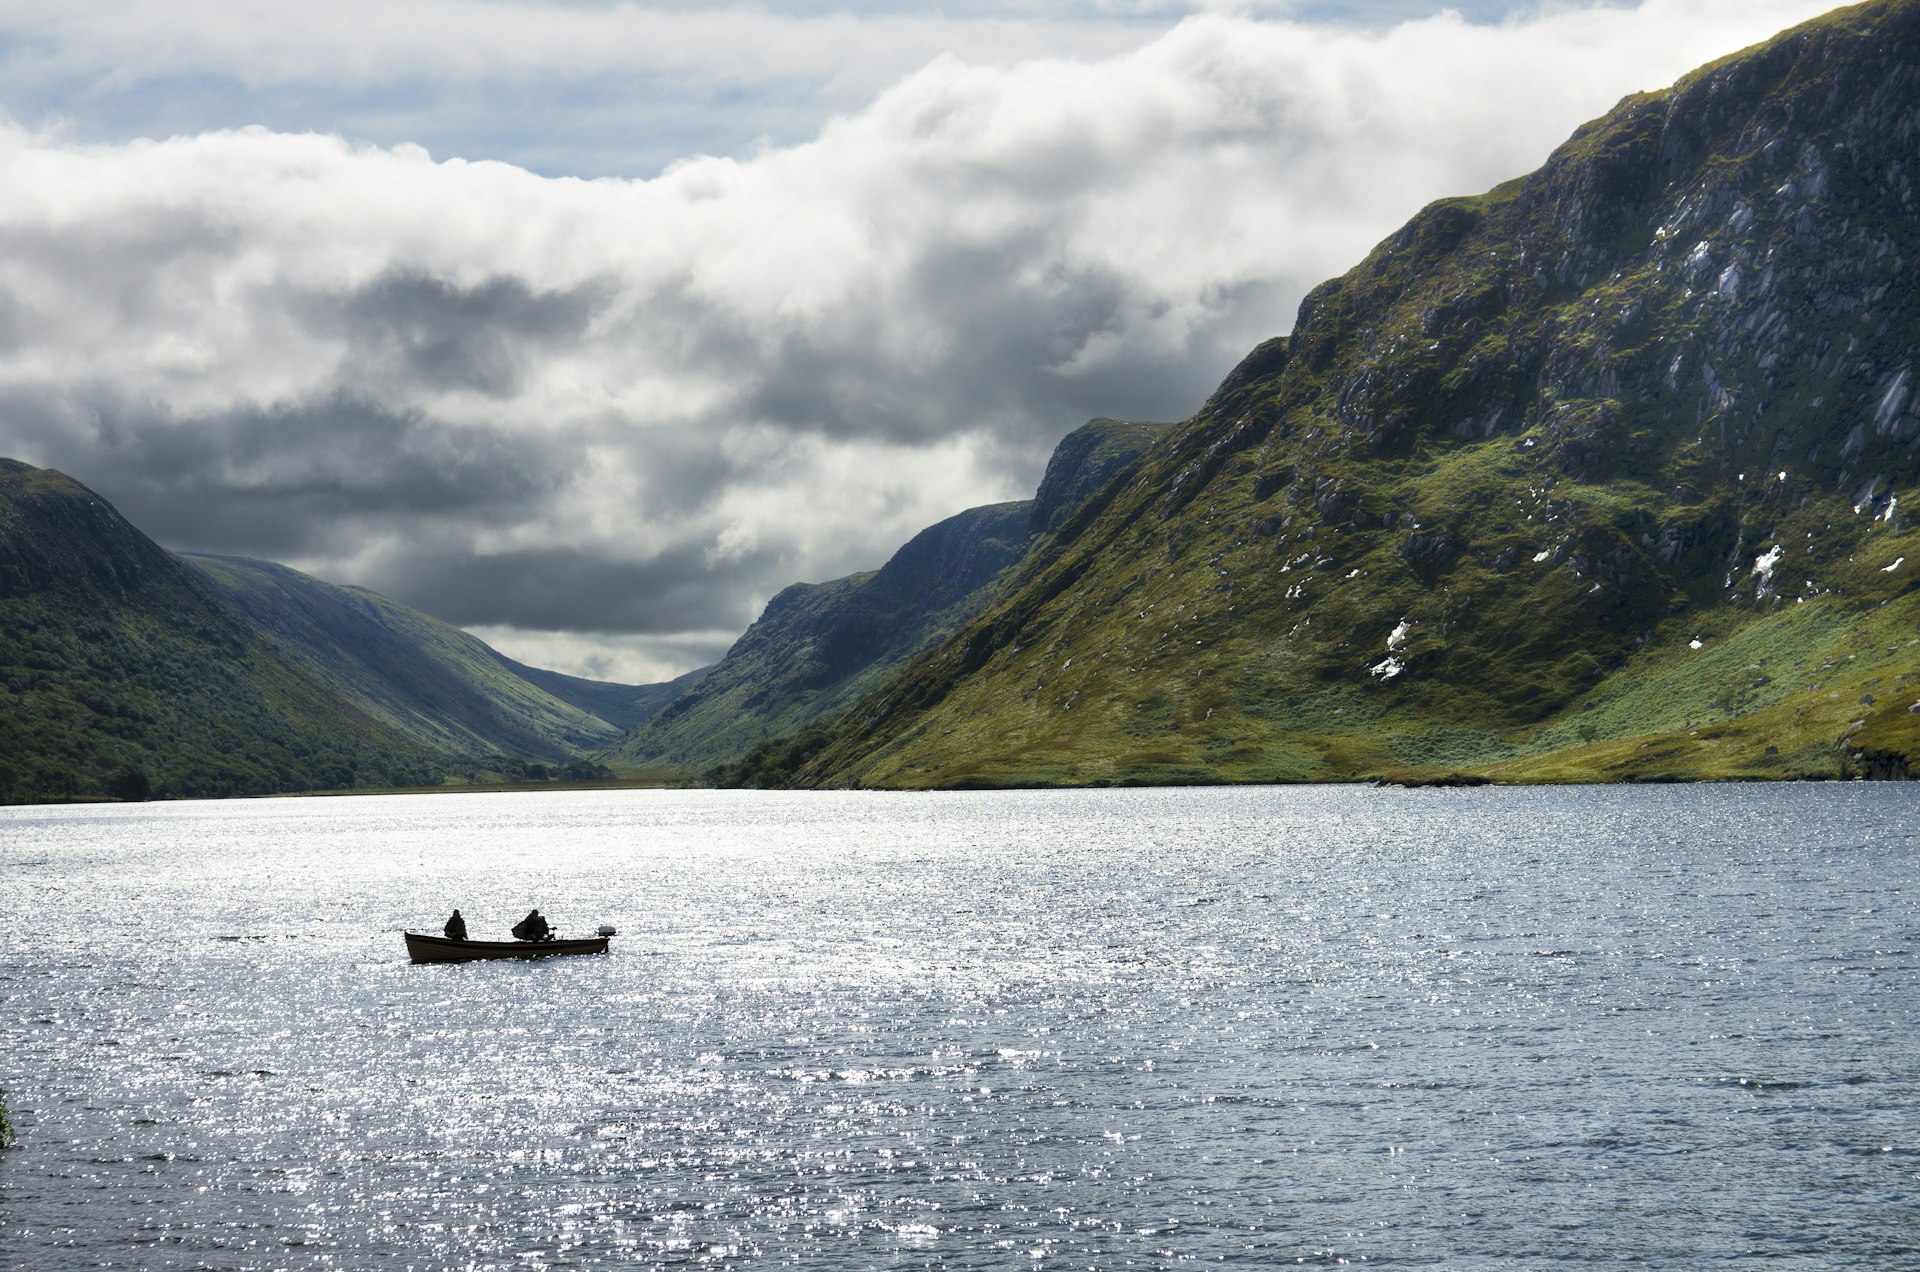 Two people on a boat sailing in the Glenveagh National Park